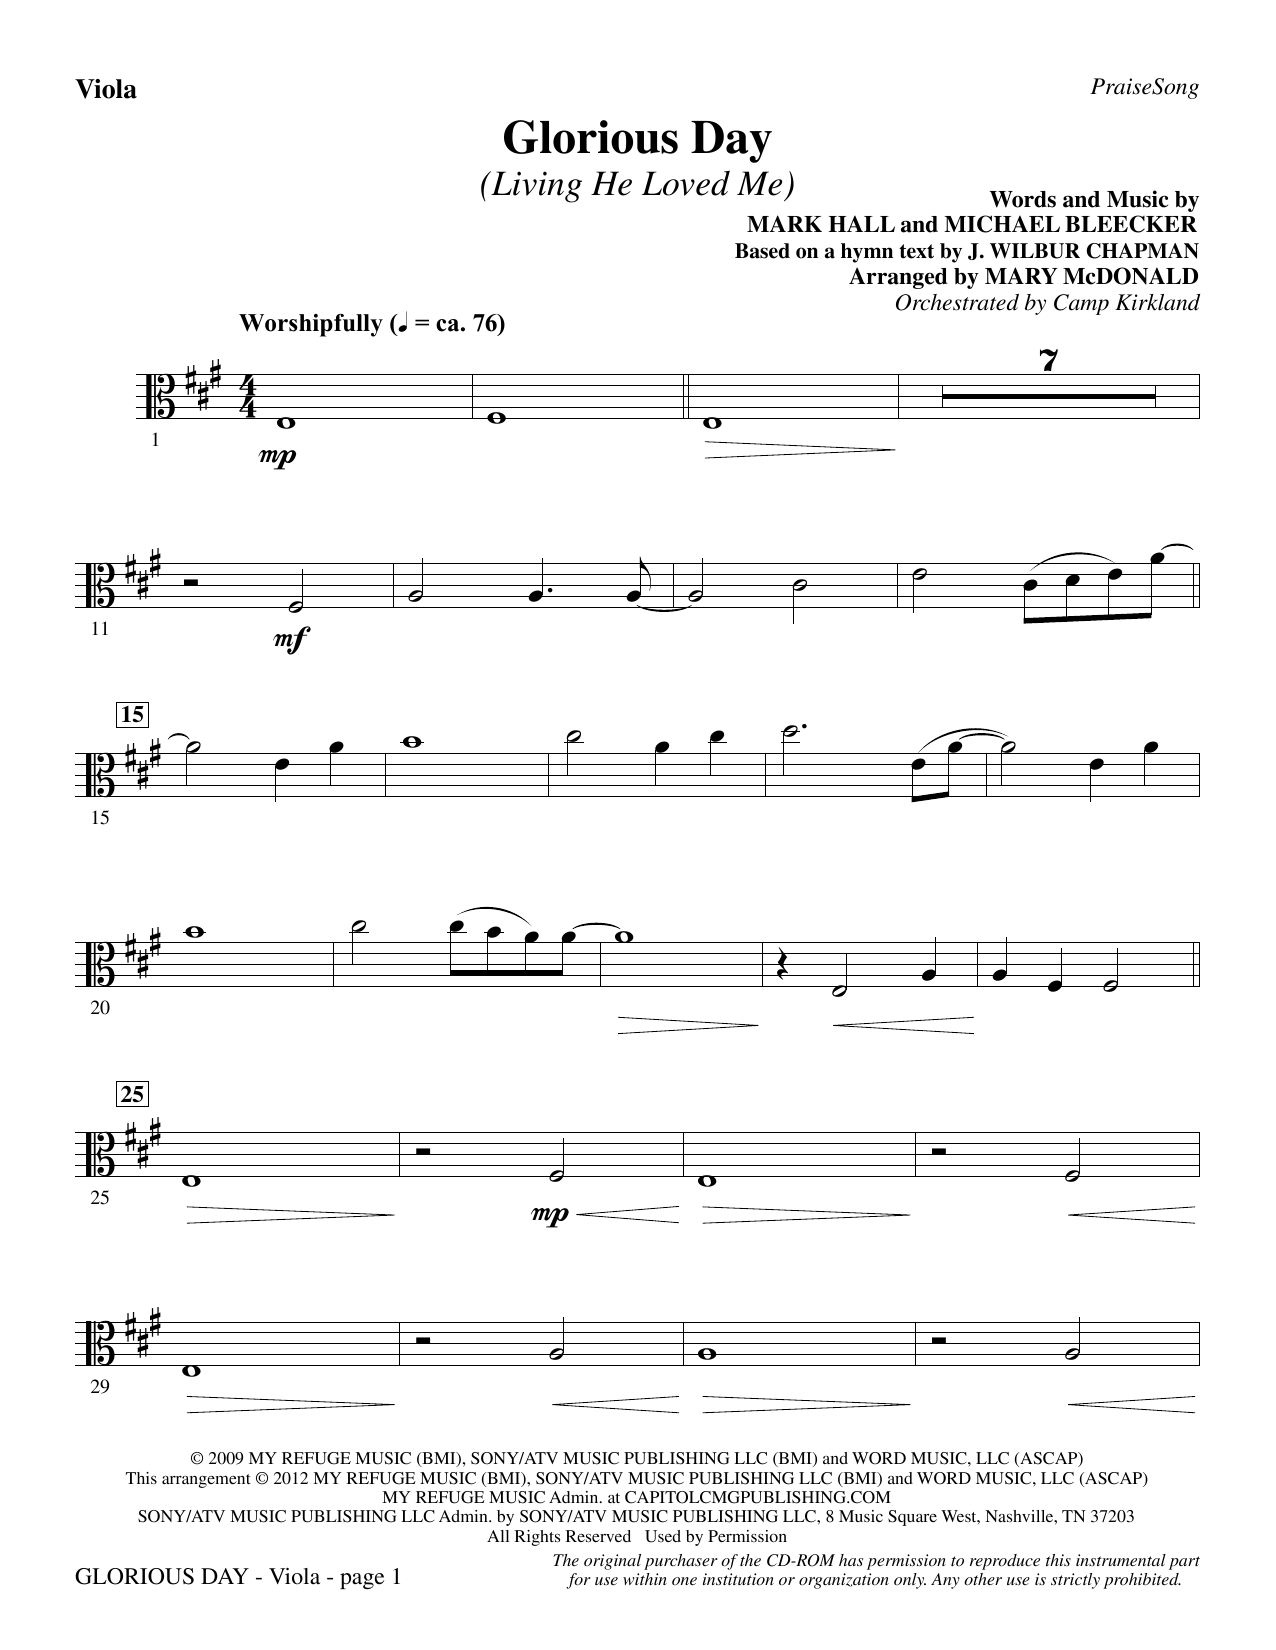 Casting Crowns Glorious Day Living He Loved Me Arr Mary Mcdonald Viola Sheet Music Download Pdf Score 307472